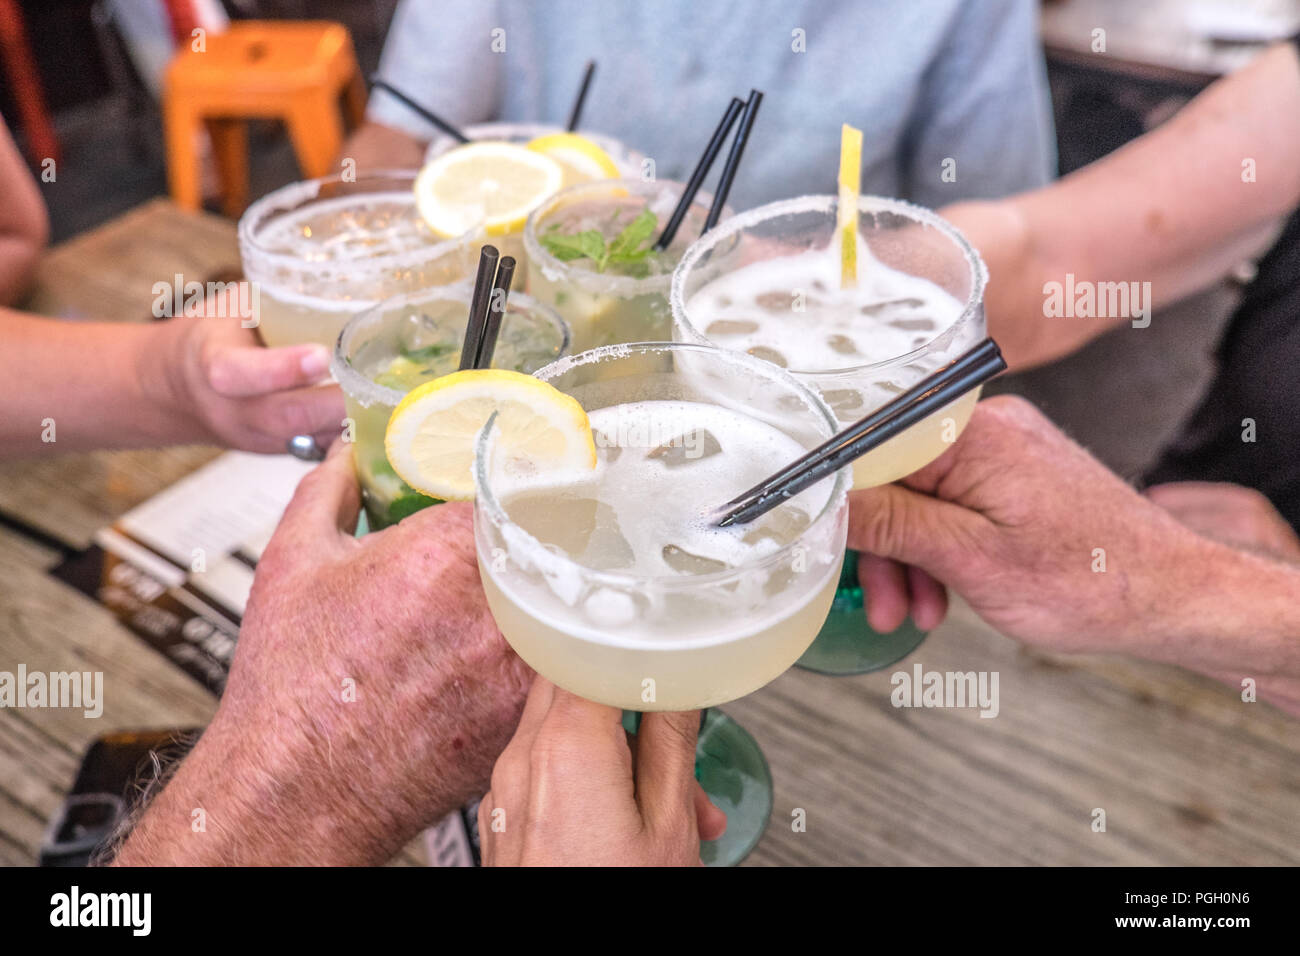 Hands young and old celebrating making a toast and clinking cocktail glasses with margaritas and mojito alcoholic drinks at celebration Stock Photo